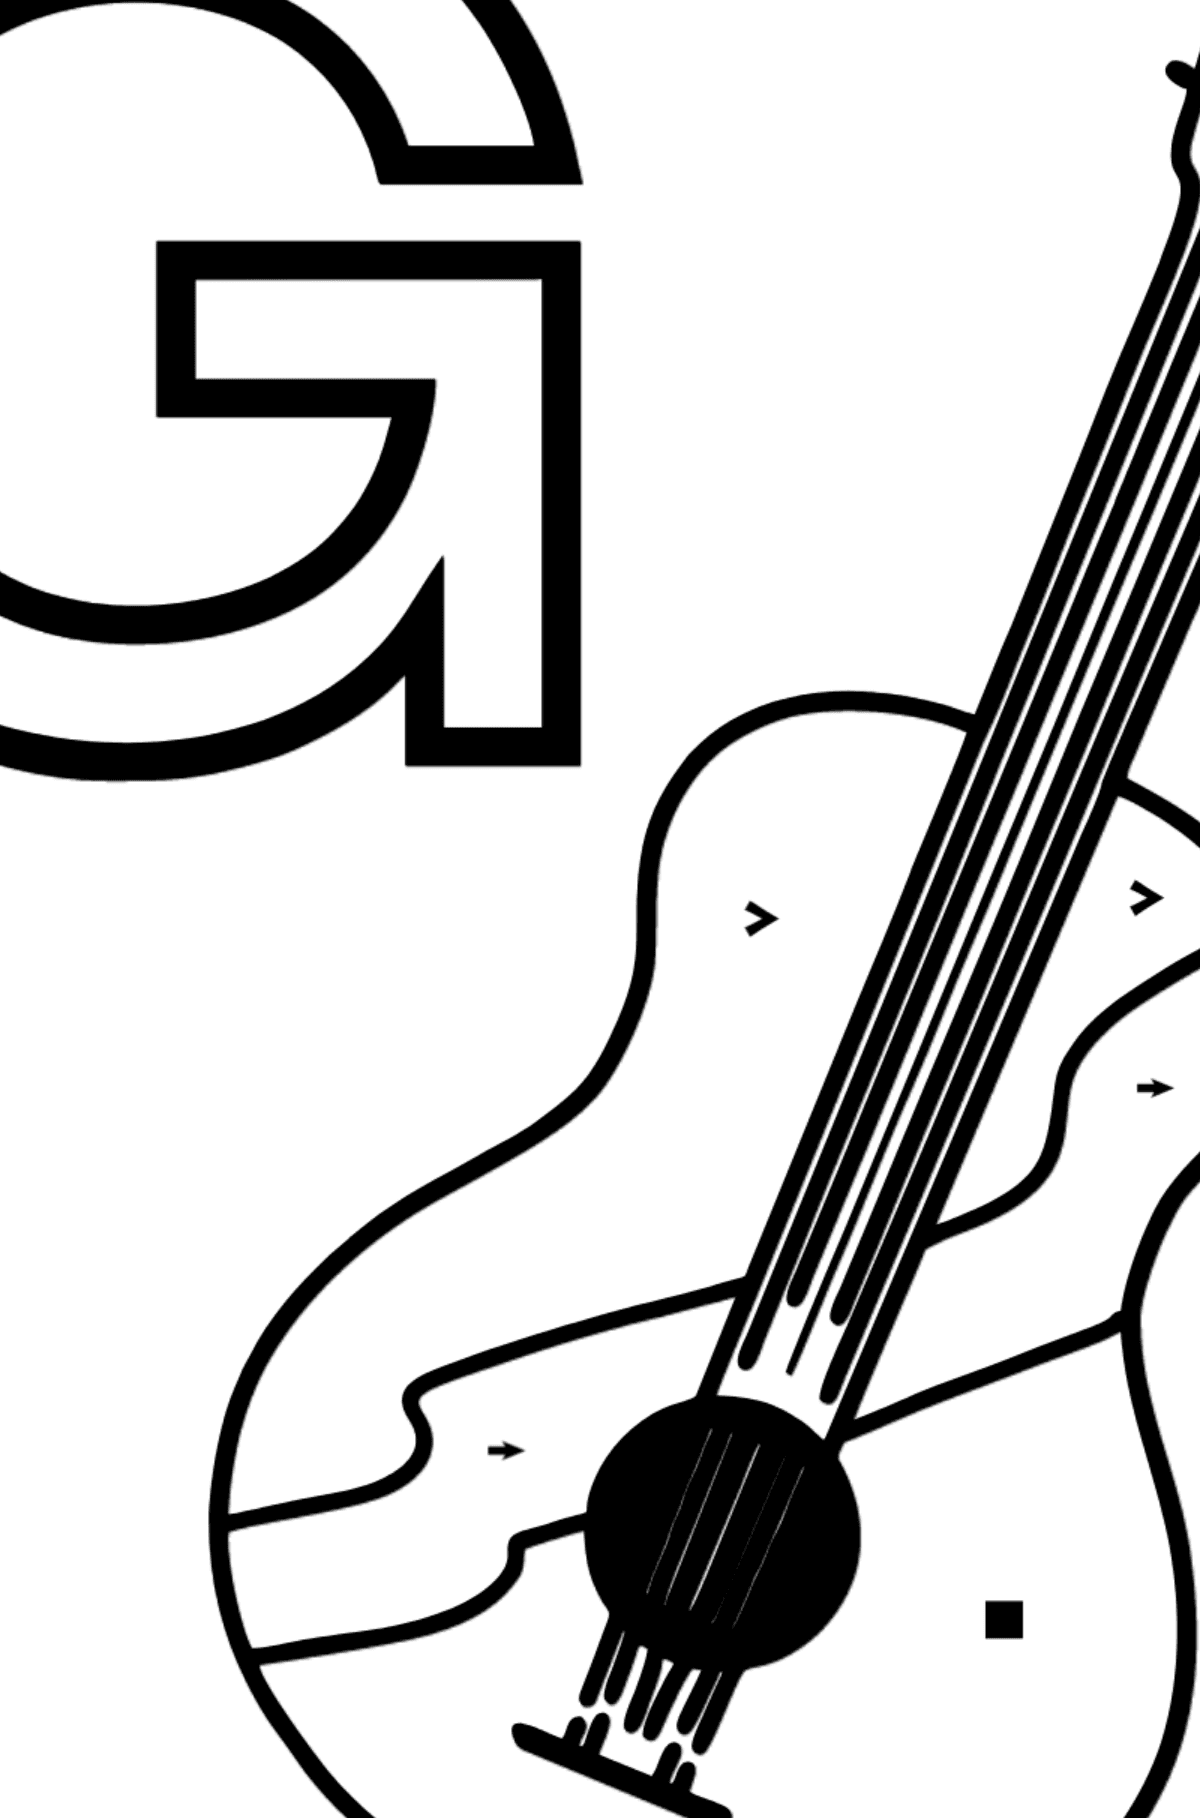 Spanish Letter G coloring pages - GUITARRA - Coloring by Symbols for Kids